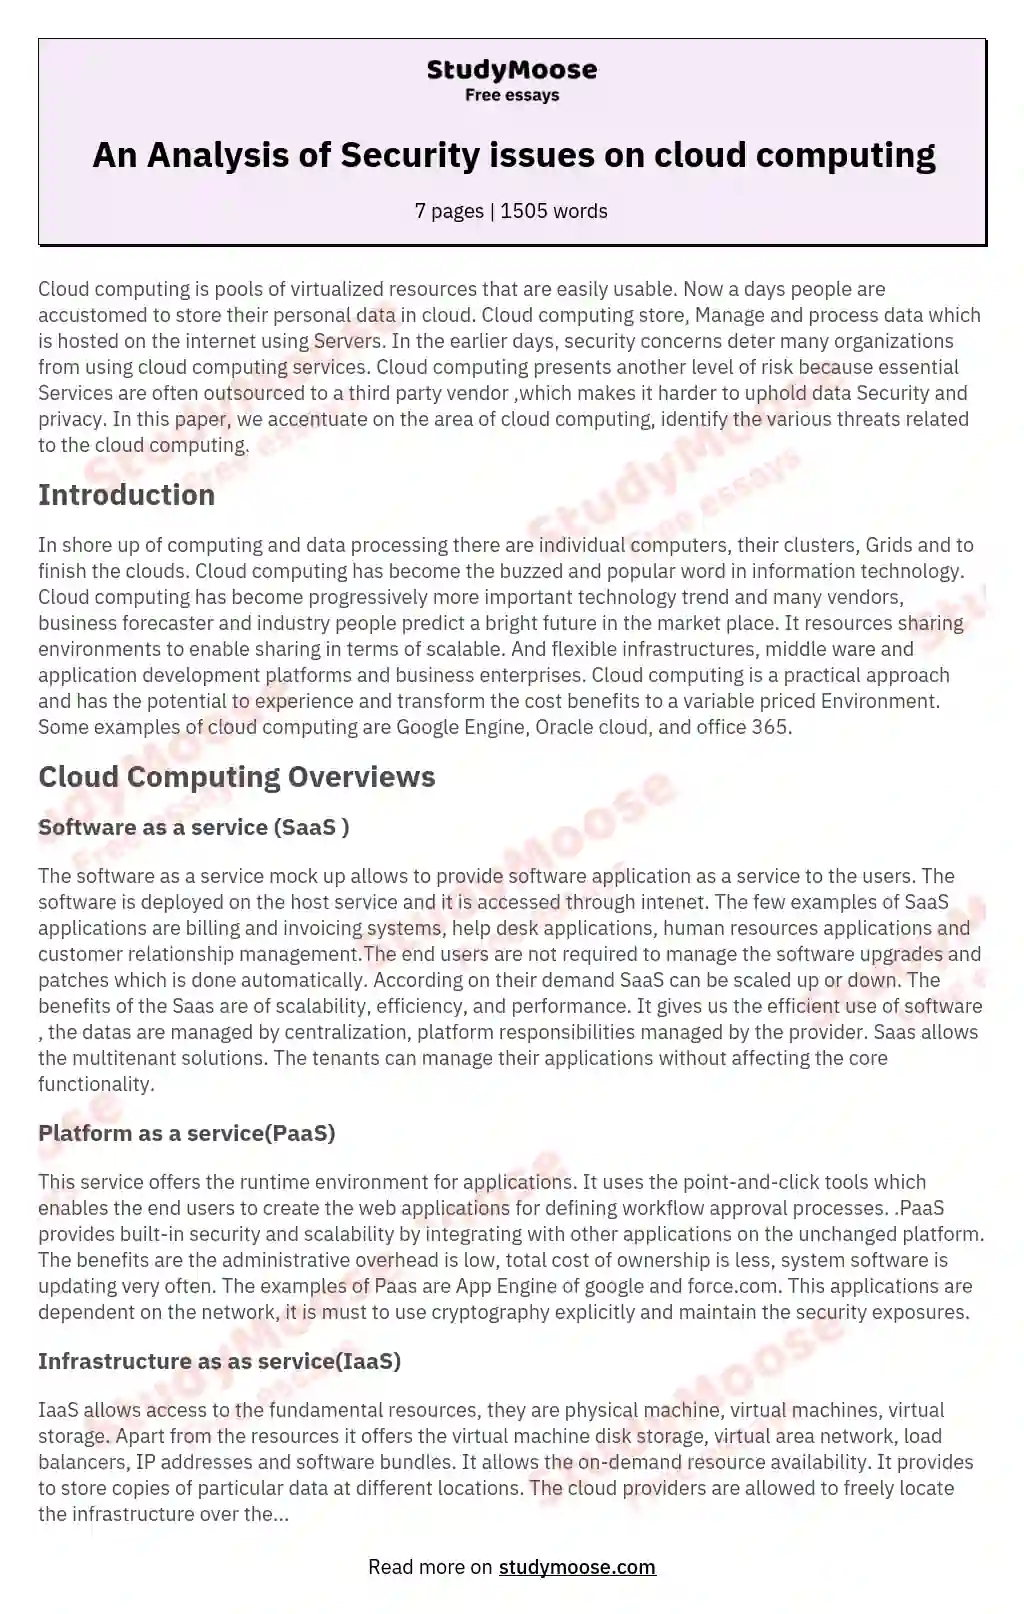 An Analysis of Security issues on cloud computing essay